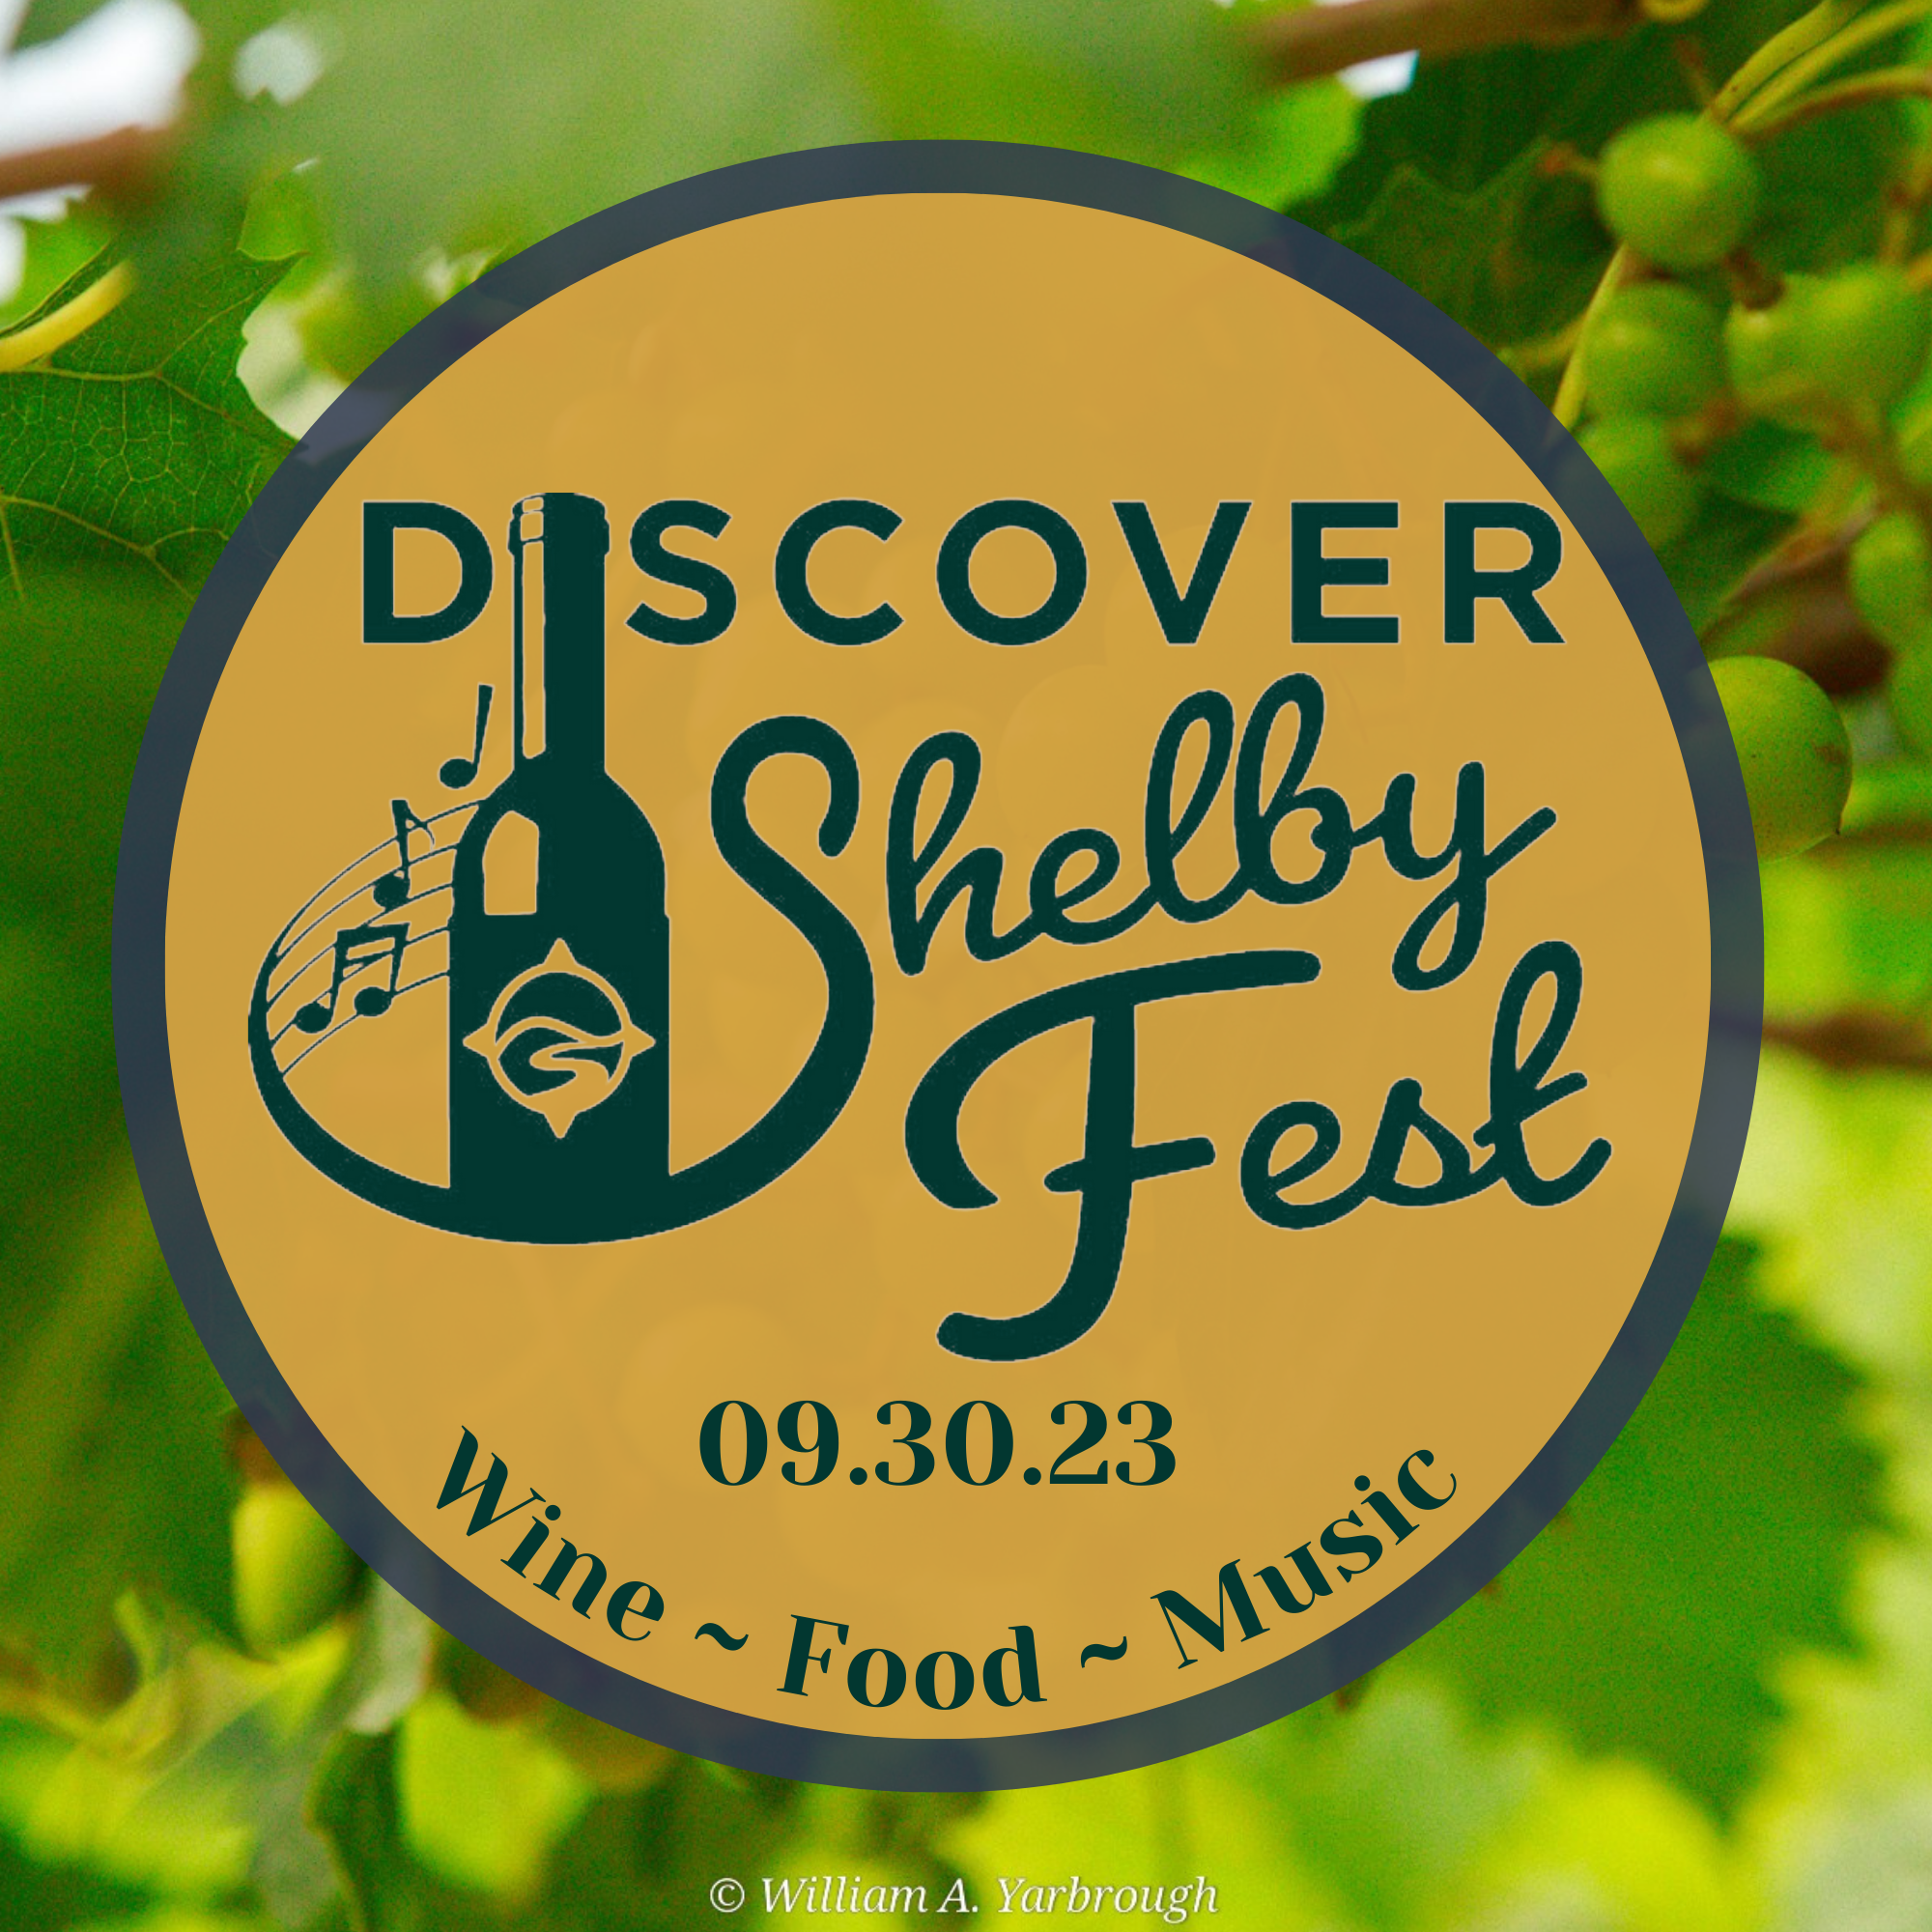 Discover Shelby Fest